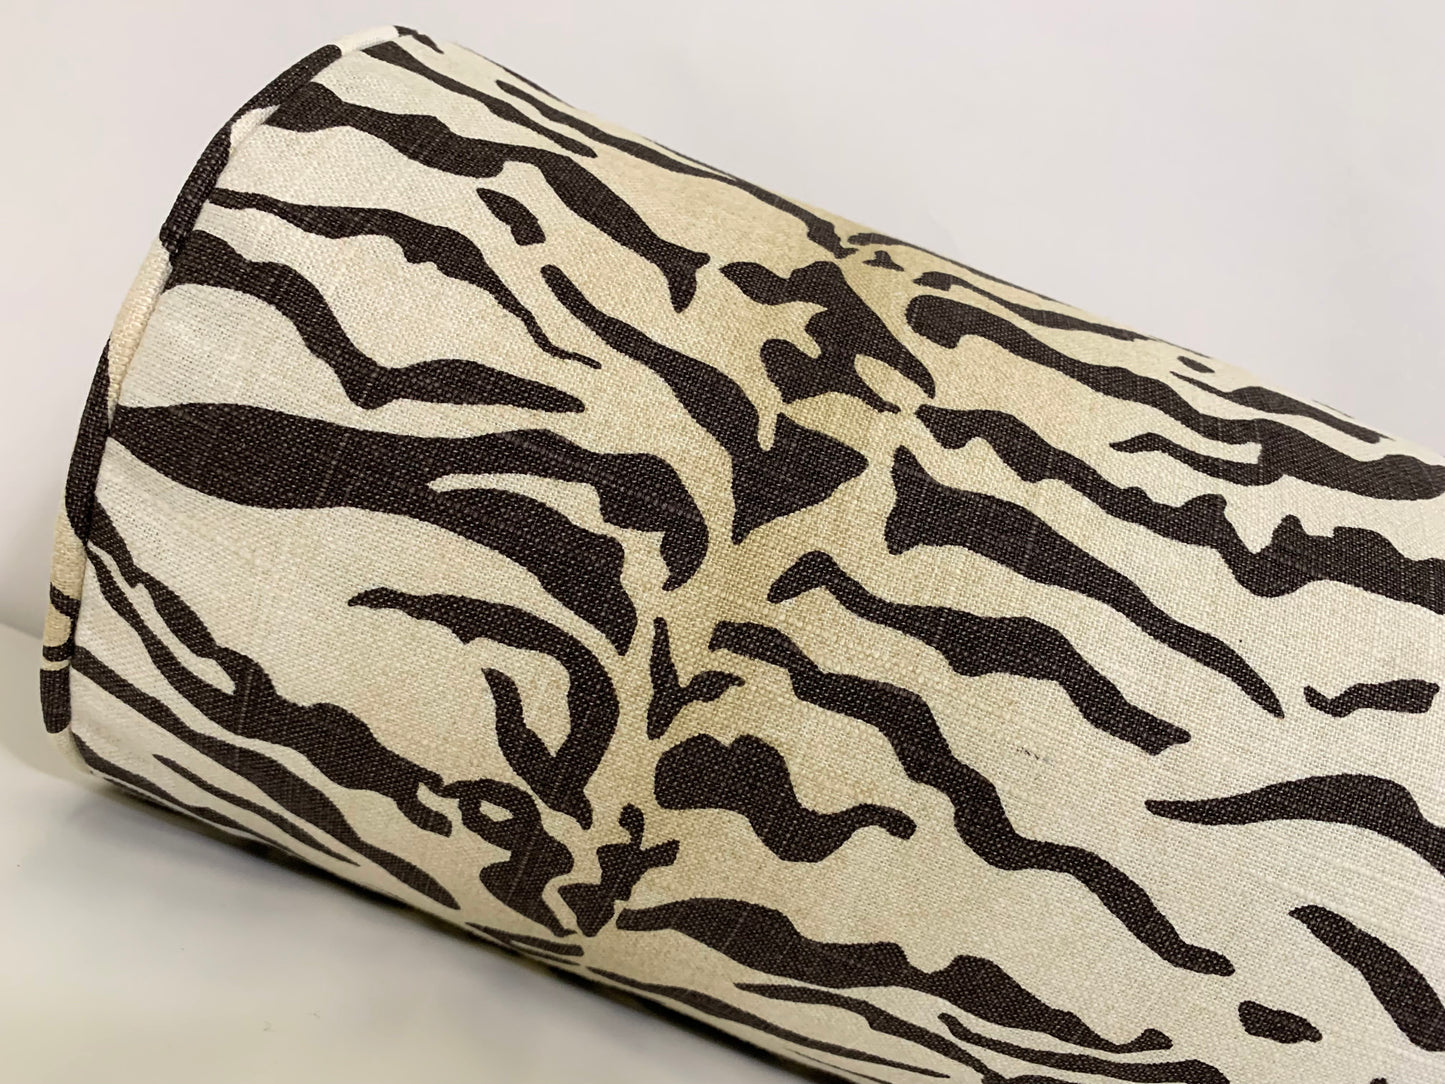 Vern Yip Bengal Tiger Stripe Pillow Cover in Winter | Available in Bolster, Lumbar, Throw, Euro Sham Sizes